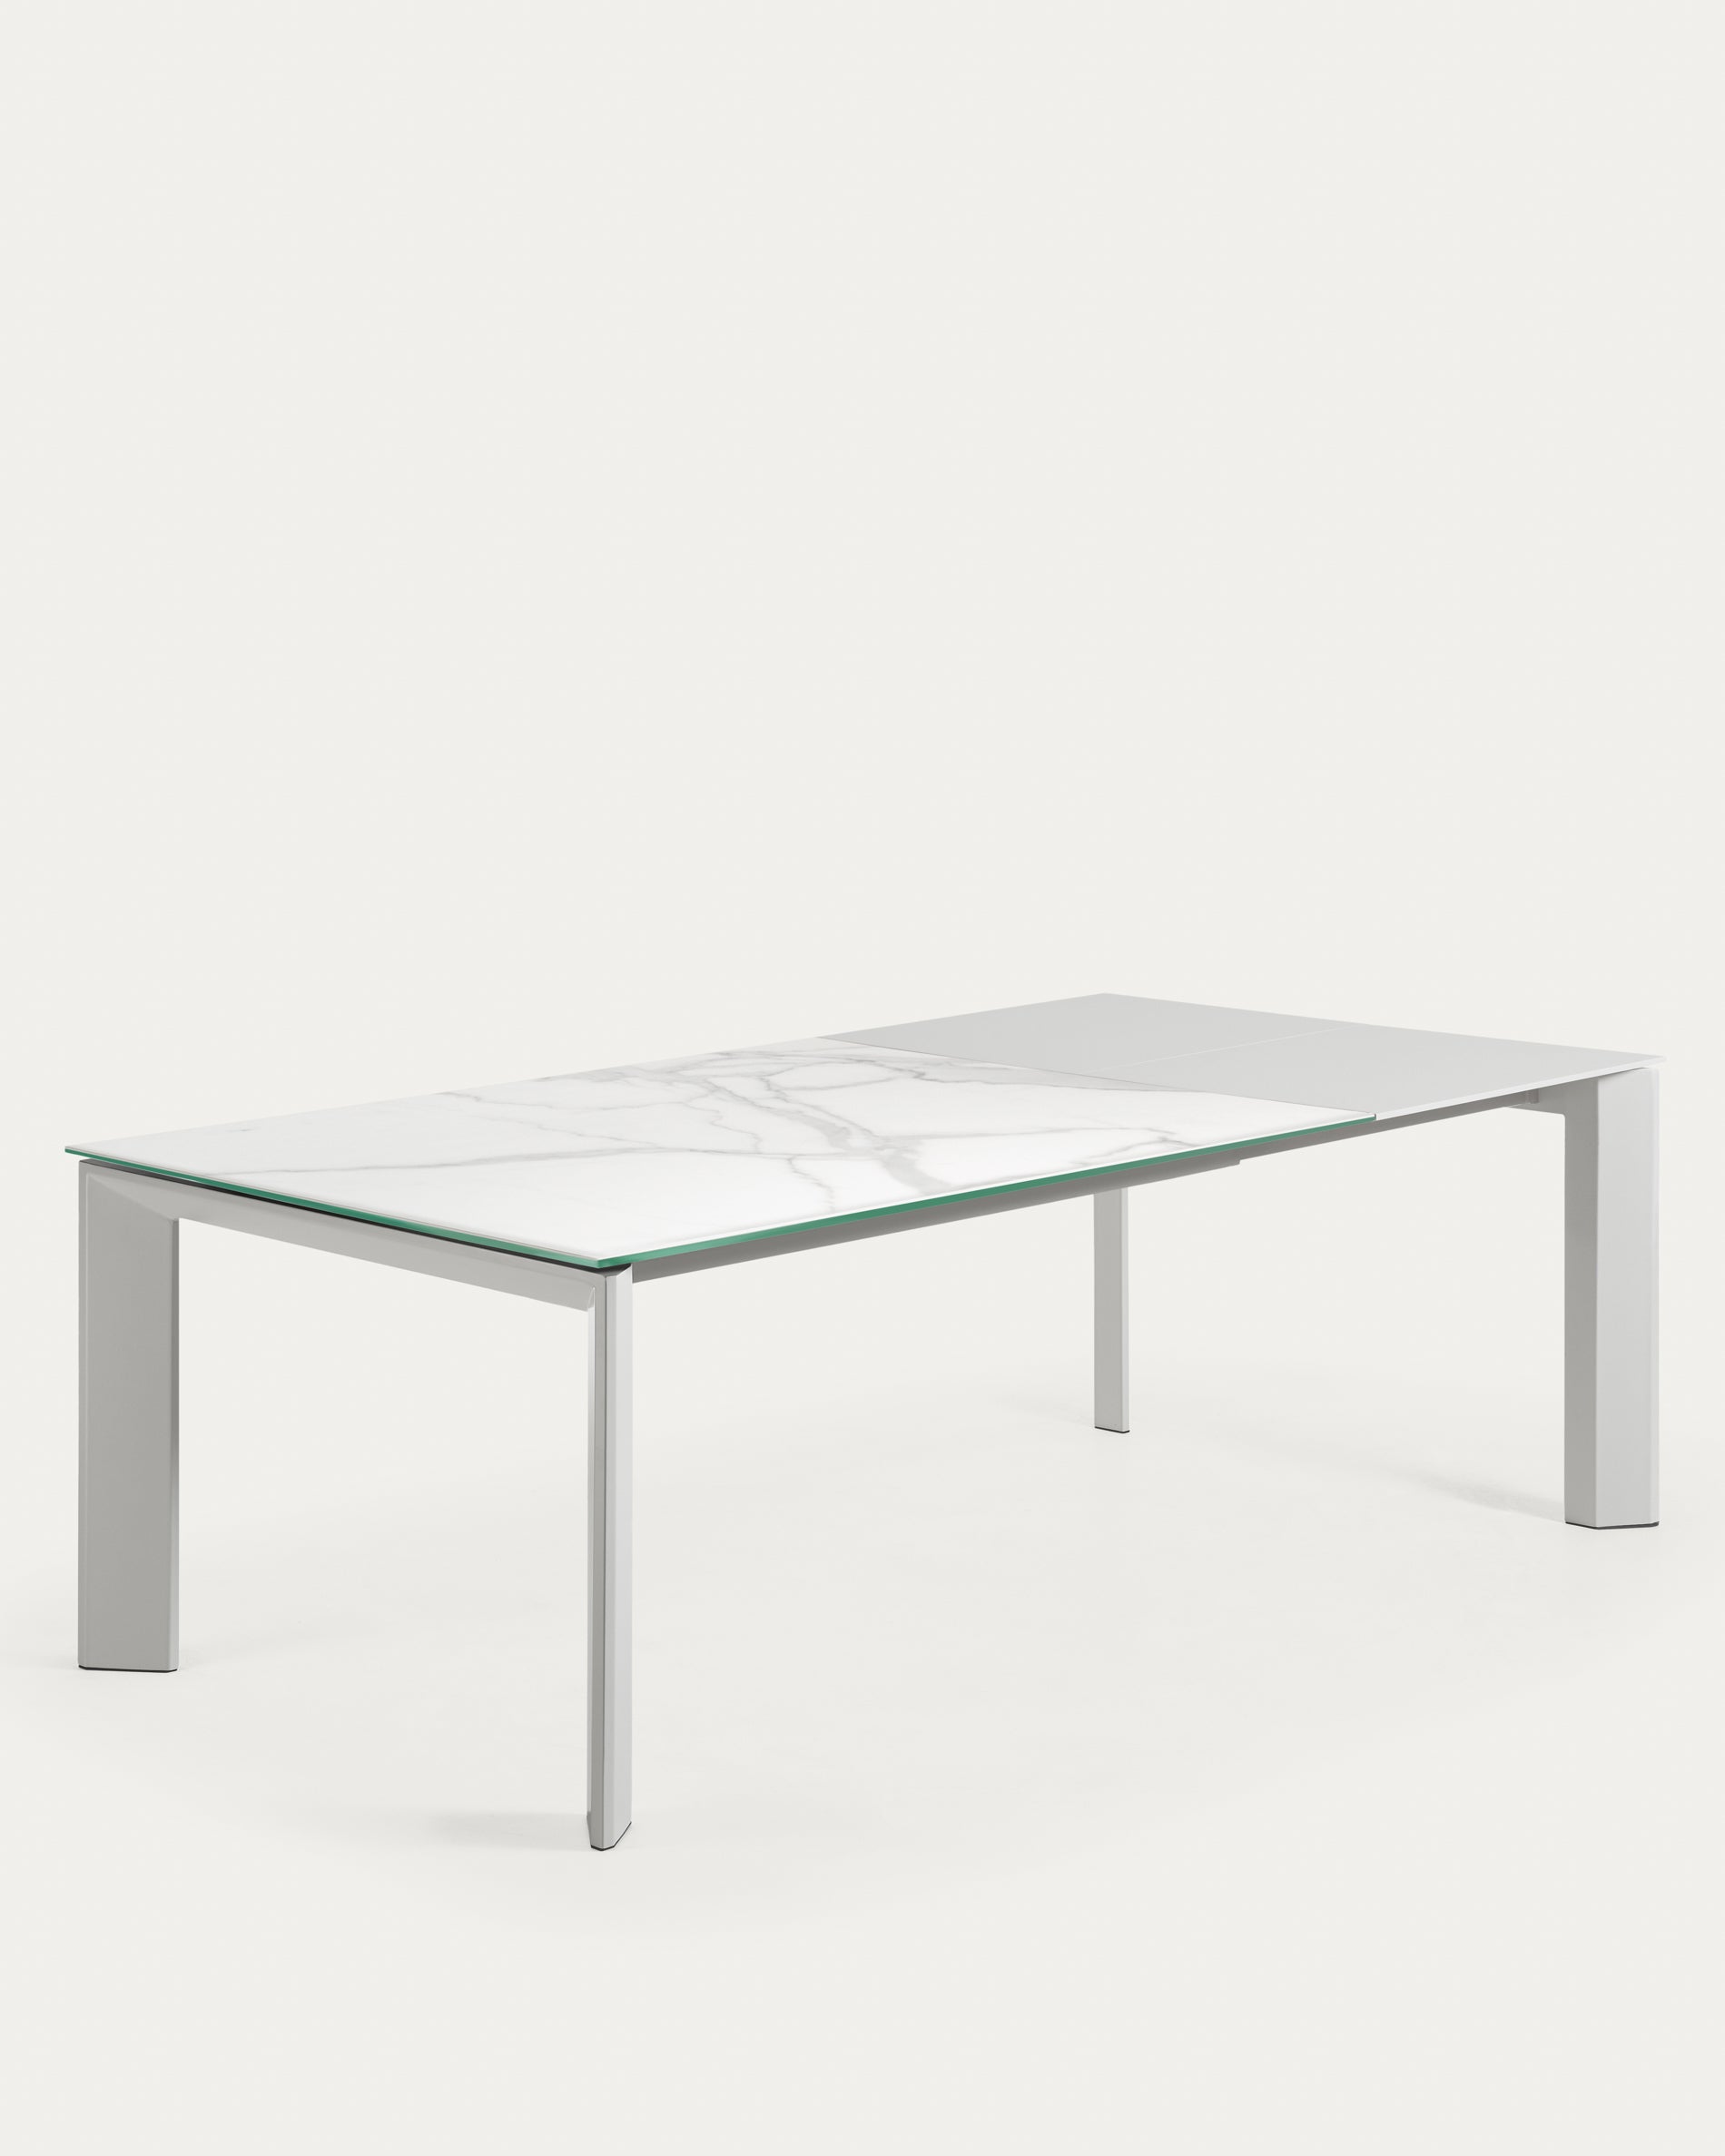 Axis porcelain extendable table with white Kalos finish and gray legs 160 (220) cm